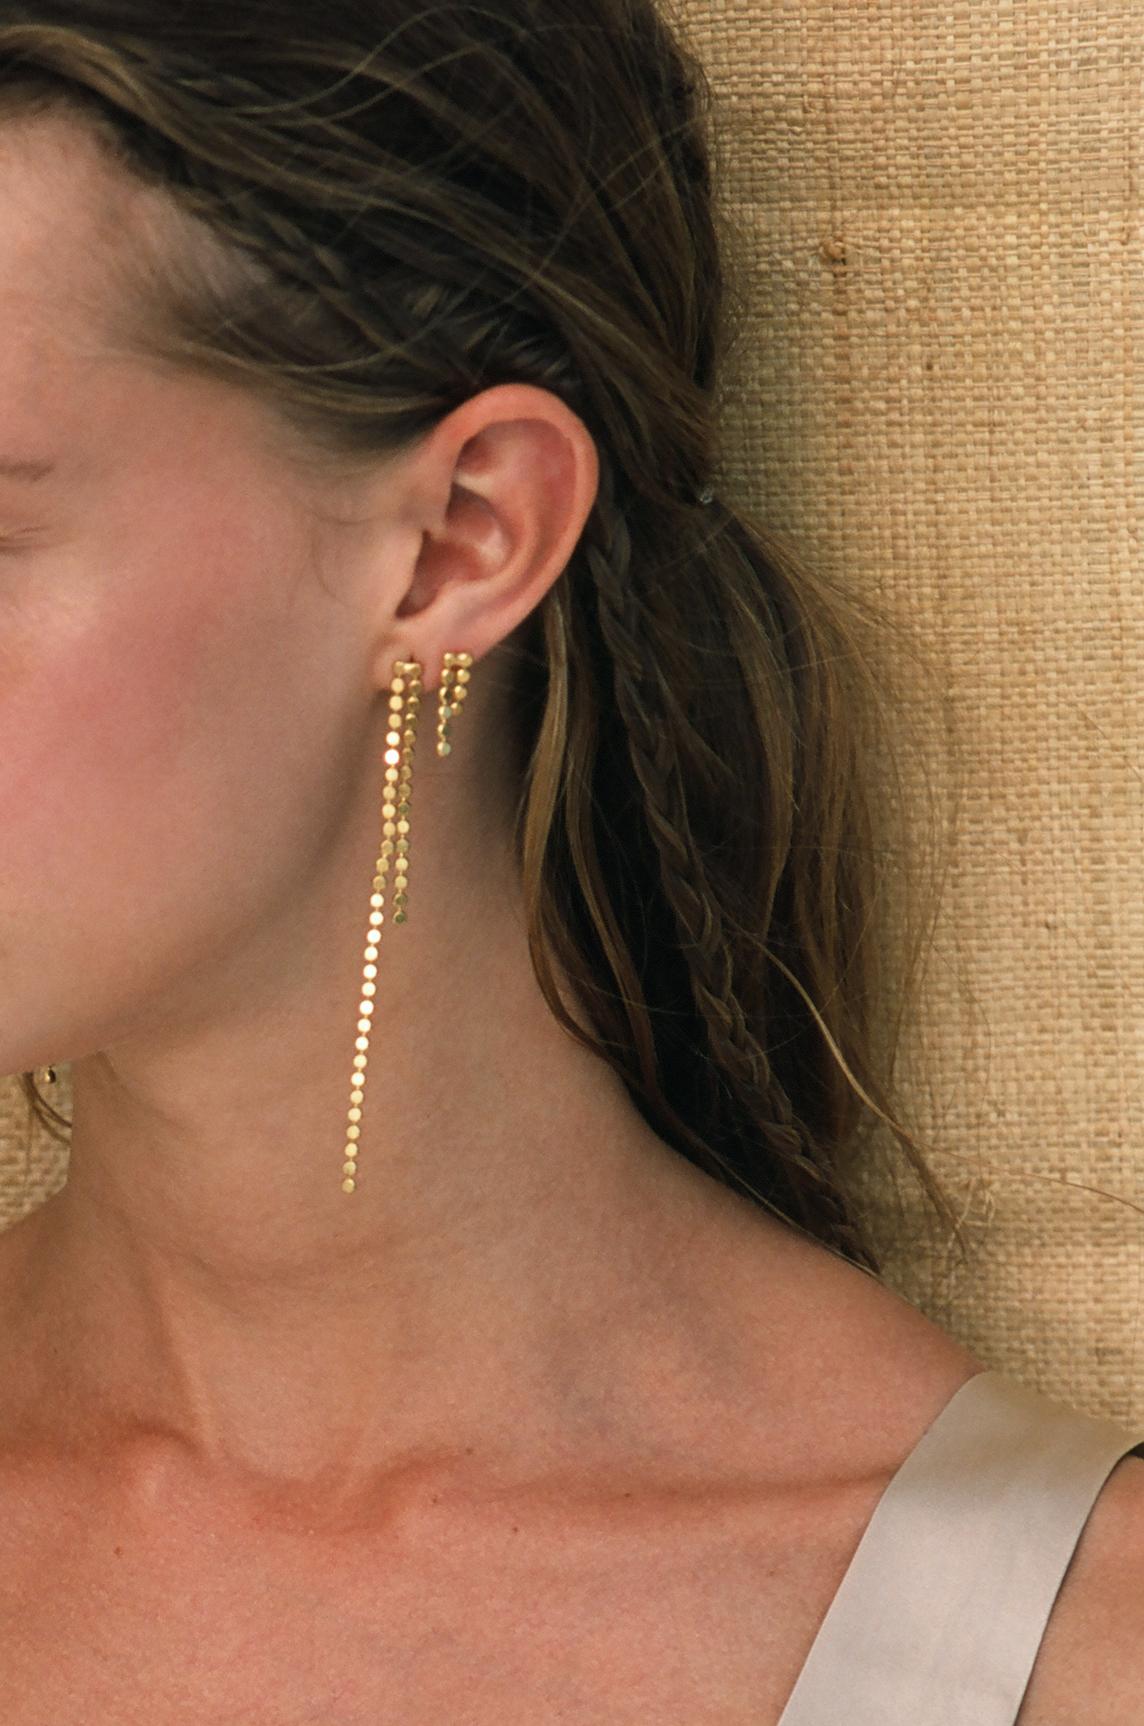 Allegria open long earrings 

These lightweight everyday earrings reflect light and make the face glow up. The use of the chain adds movement to the pair and delivers an even more elevated look.

Tip: Wear them with the Alegria open mini earrings on